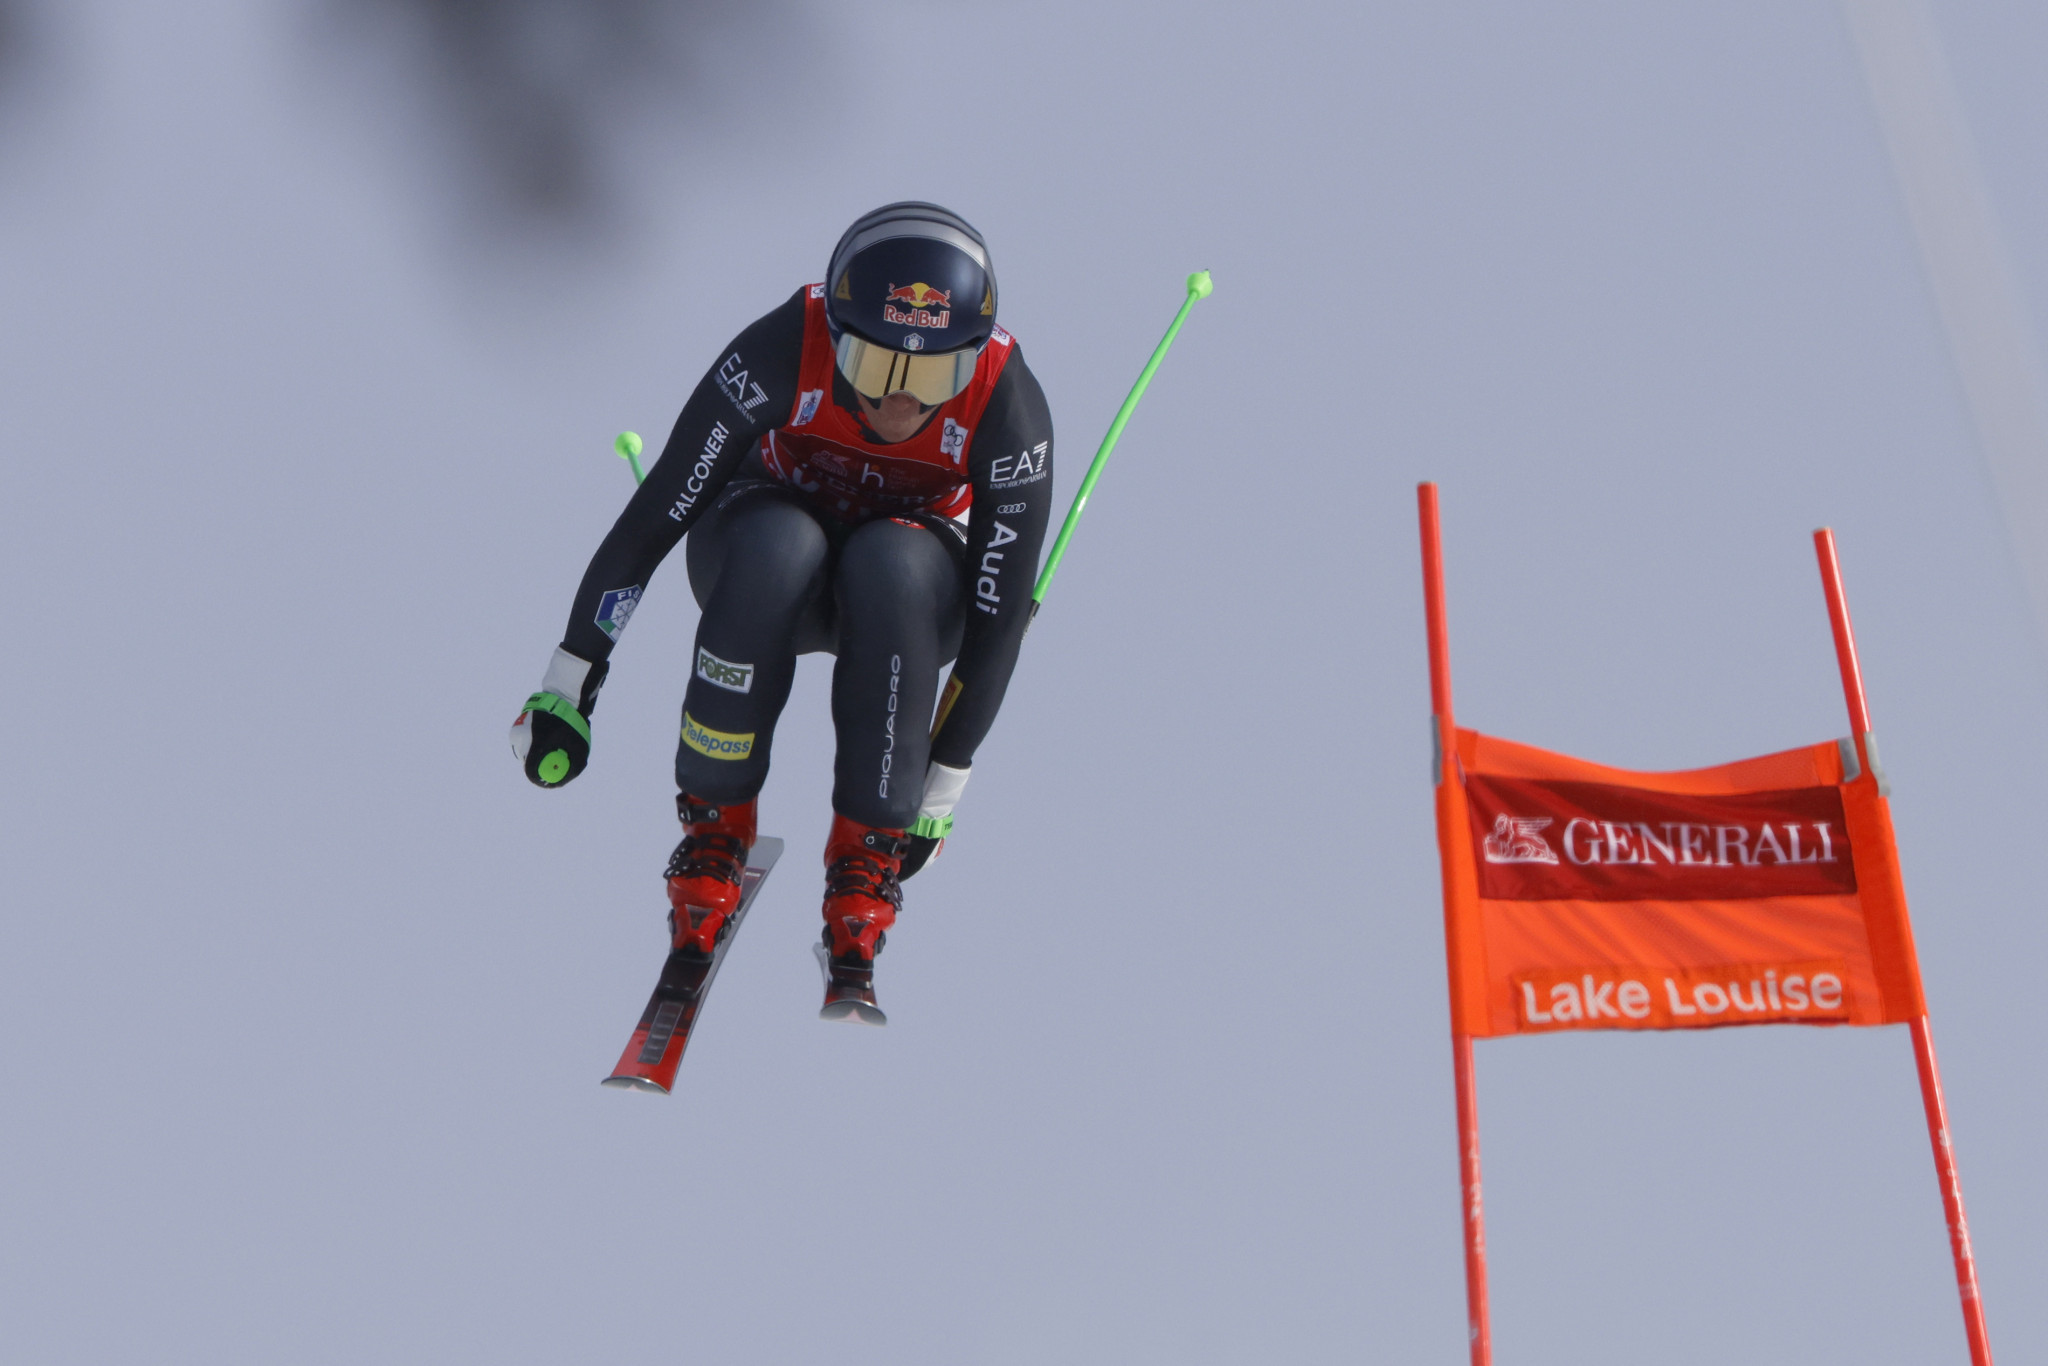 Italy's Sofia Goggia triumphed by just 0.04sec at the FIS Alpine Ski World Cup in Lake Louise ©Getty Images